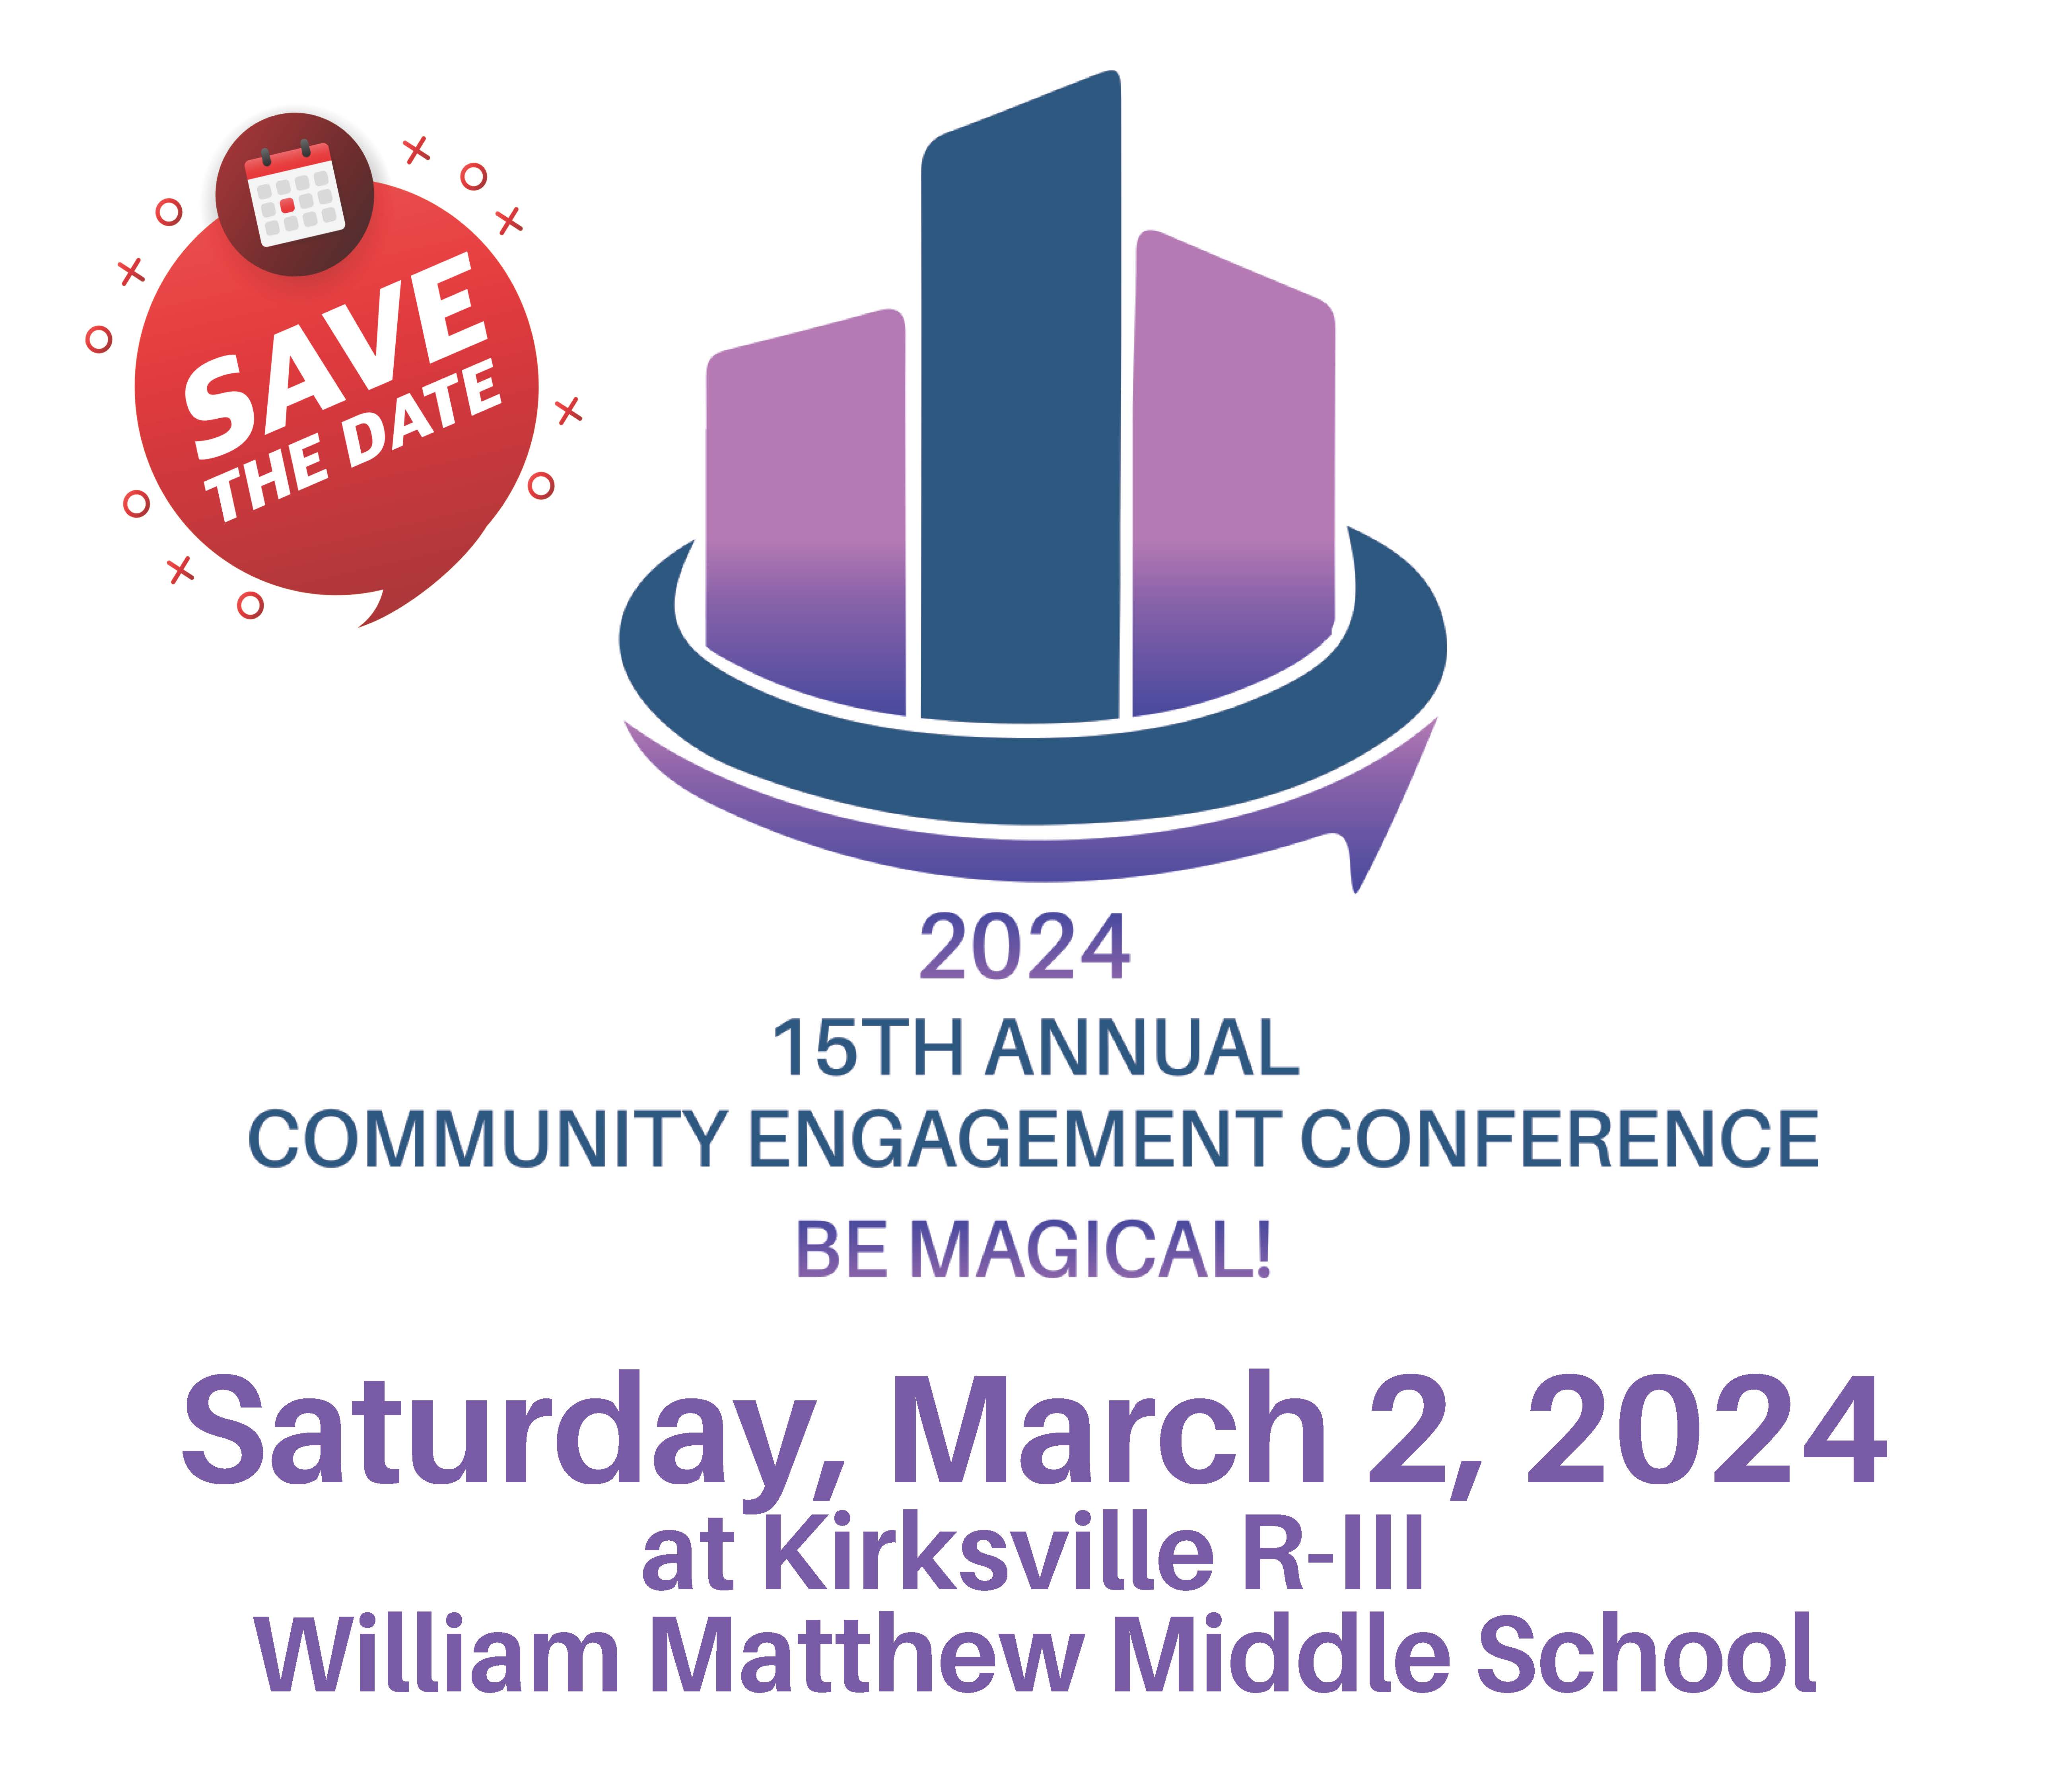 Check more about 15th Annual Community Engagement Conference